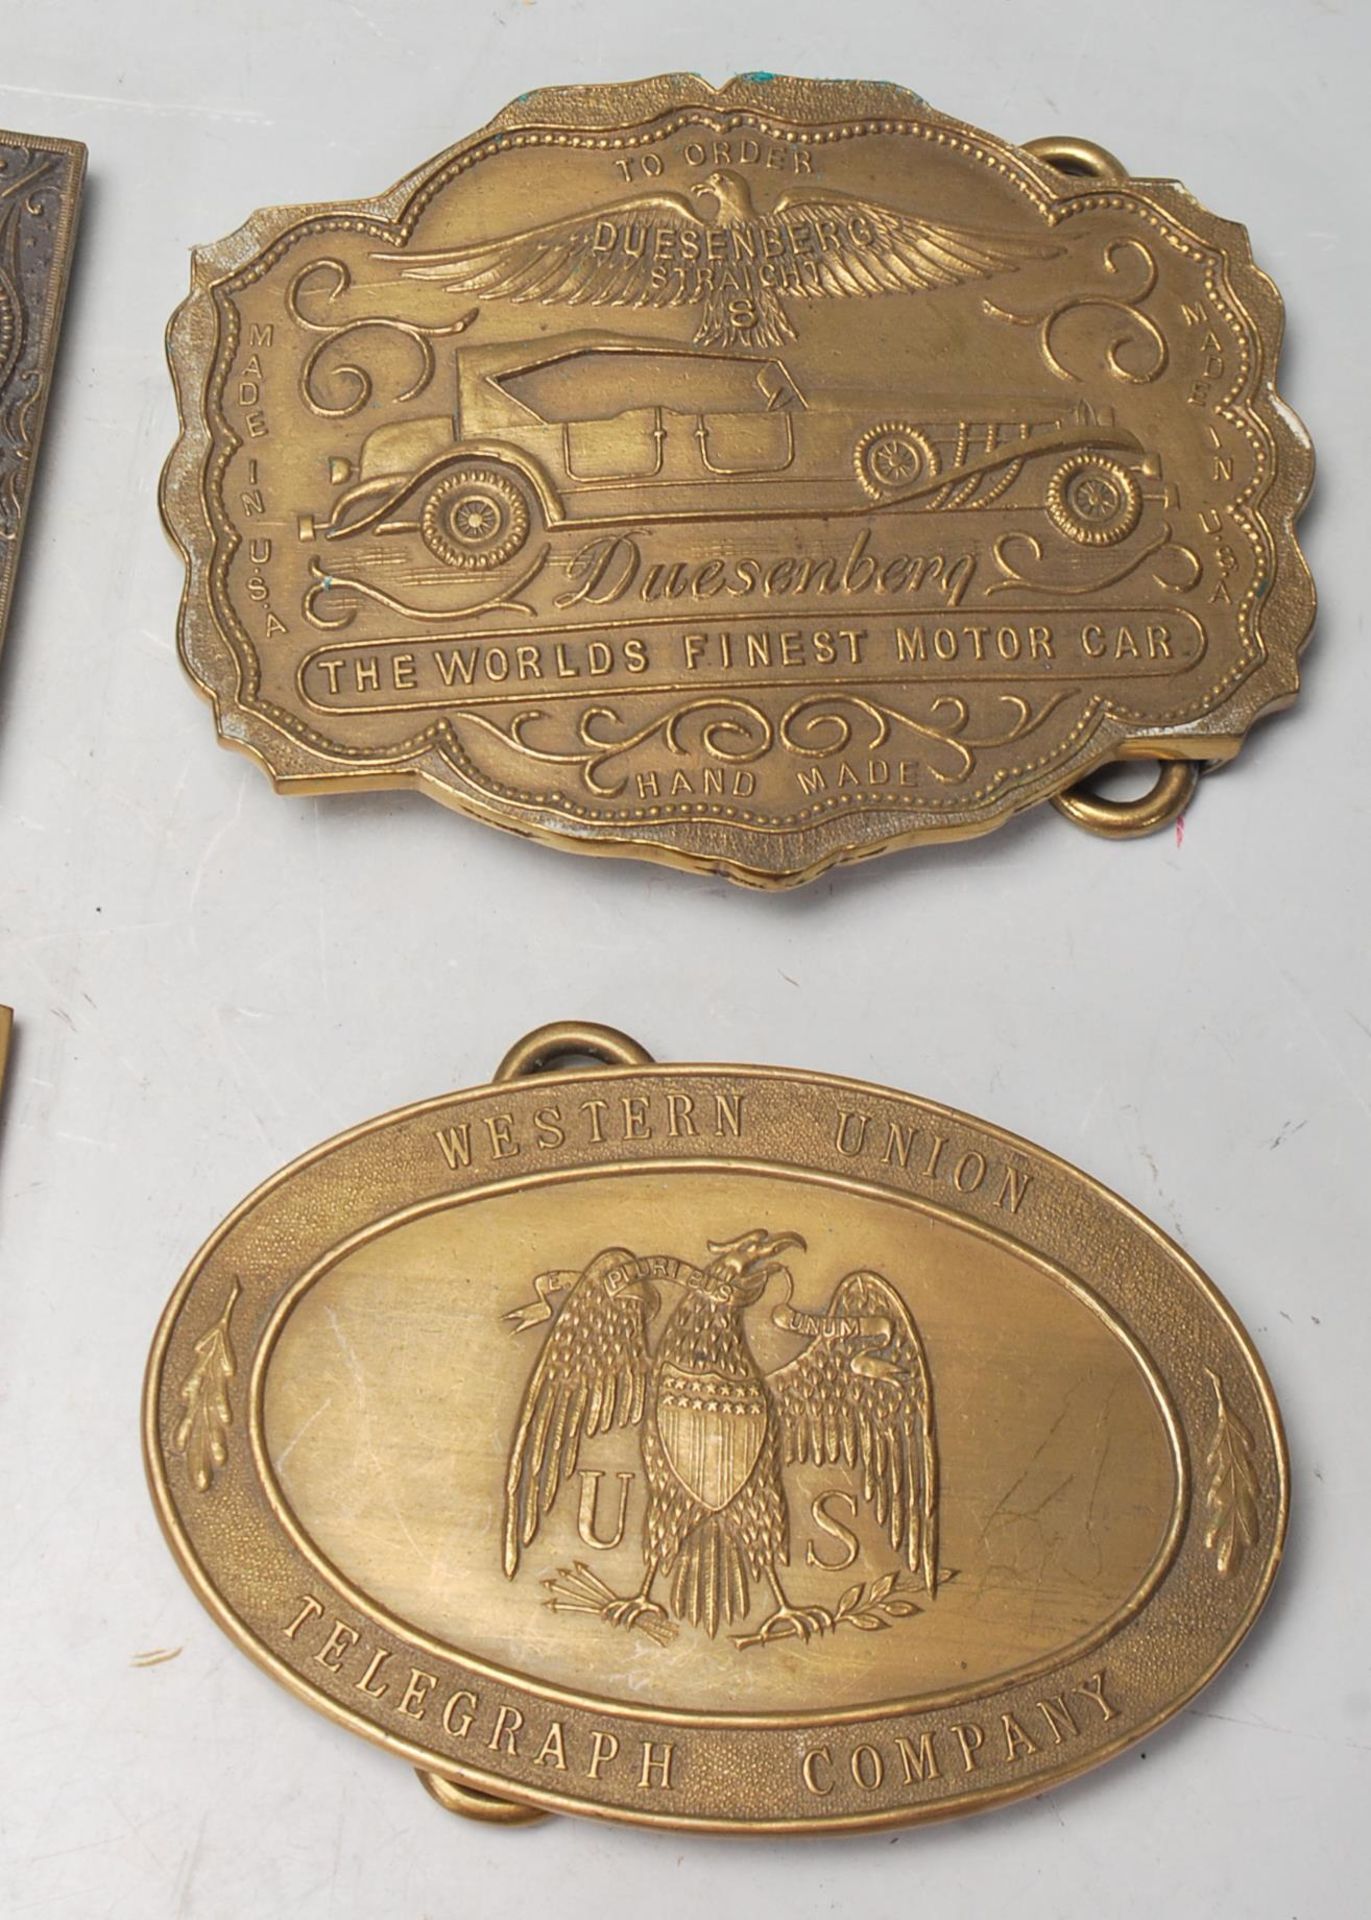 COLLECTION OF AMERICAN BRASS BELT BUCKLES - Image 6 of 7